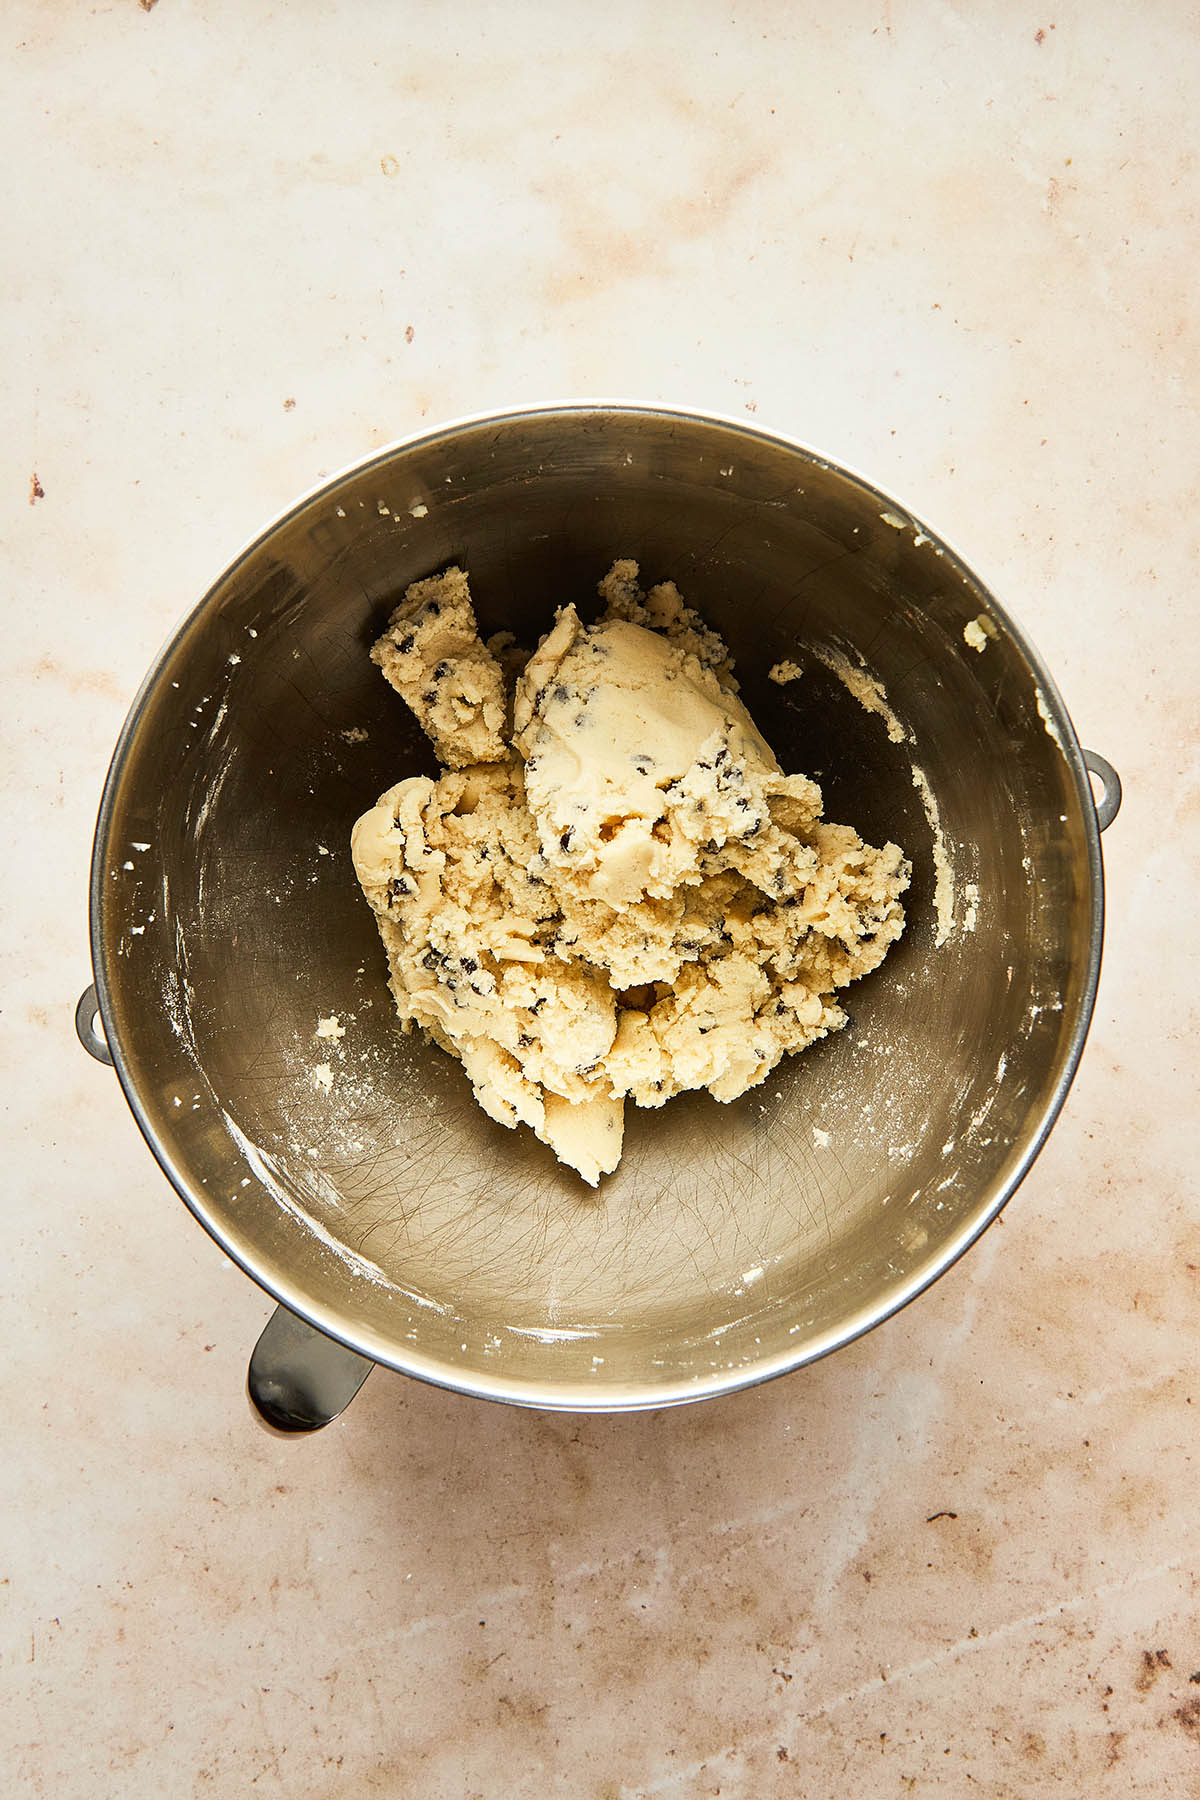 Cookie dough in a metal stand-mixer mixing bowl.